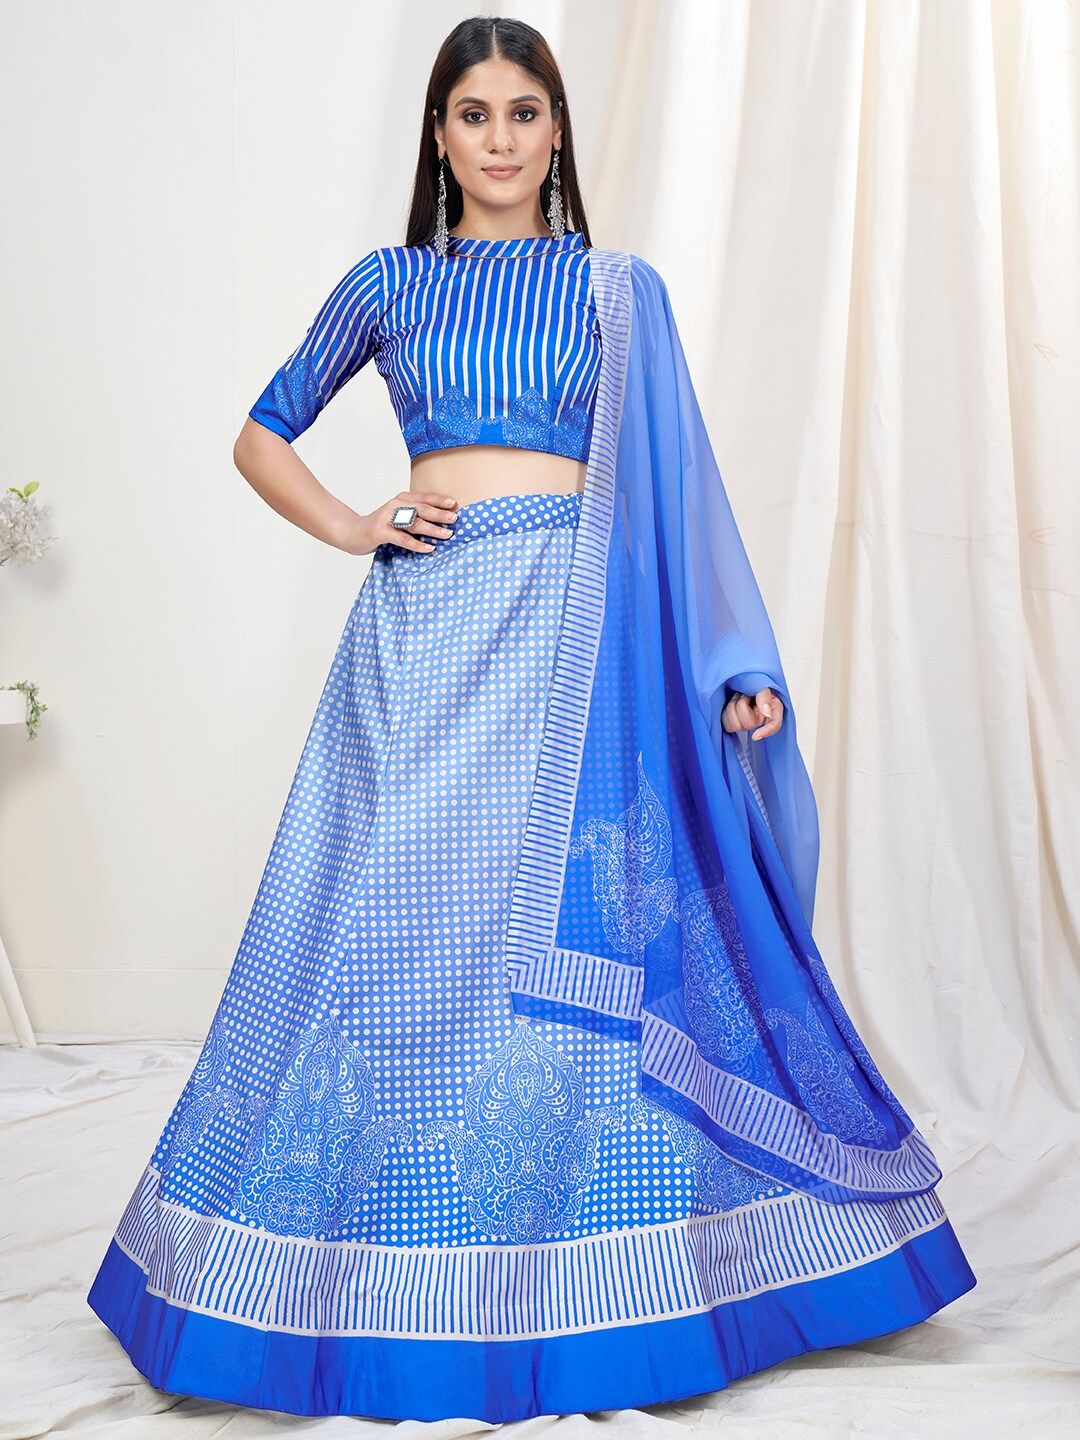 WHITE FIRE Blue & White Printed Semi-Stitched Lehenga & Unstitched Blouse With Dupatta Price in India